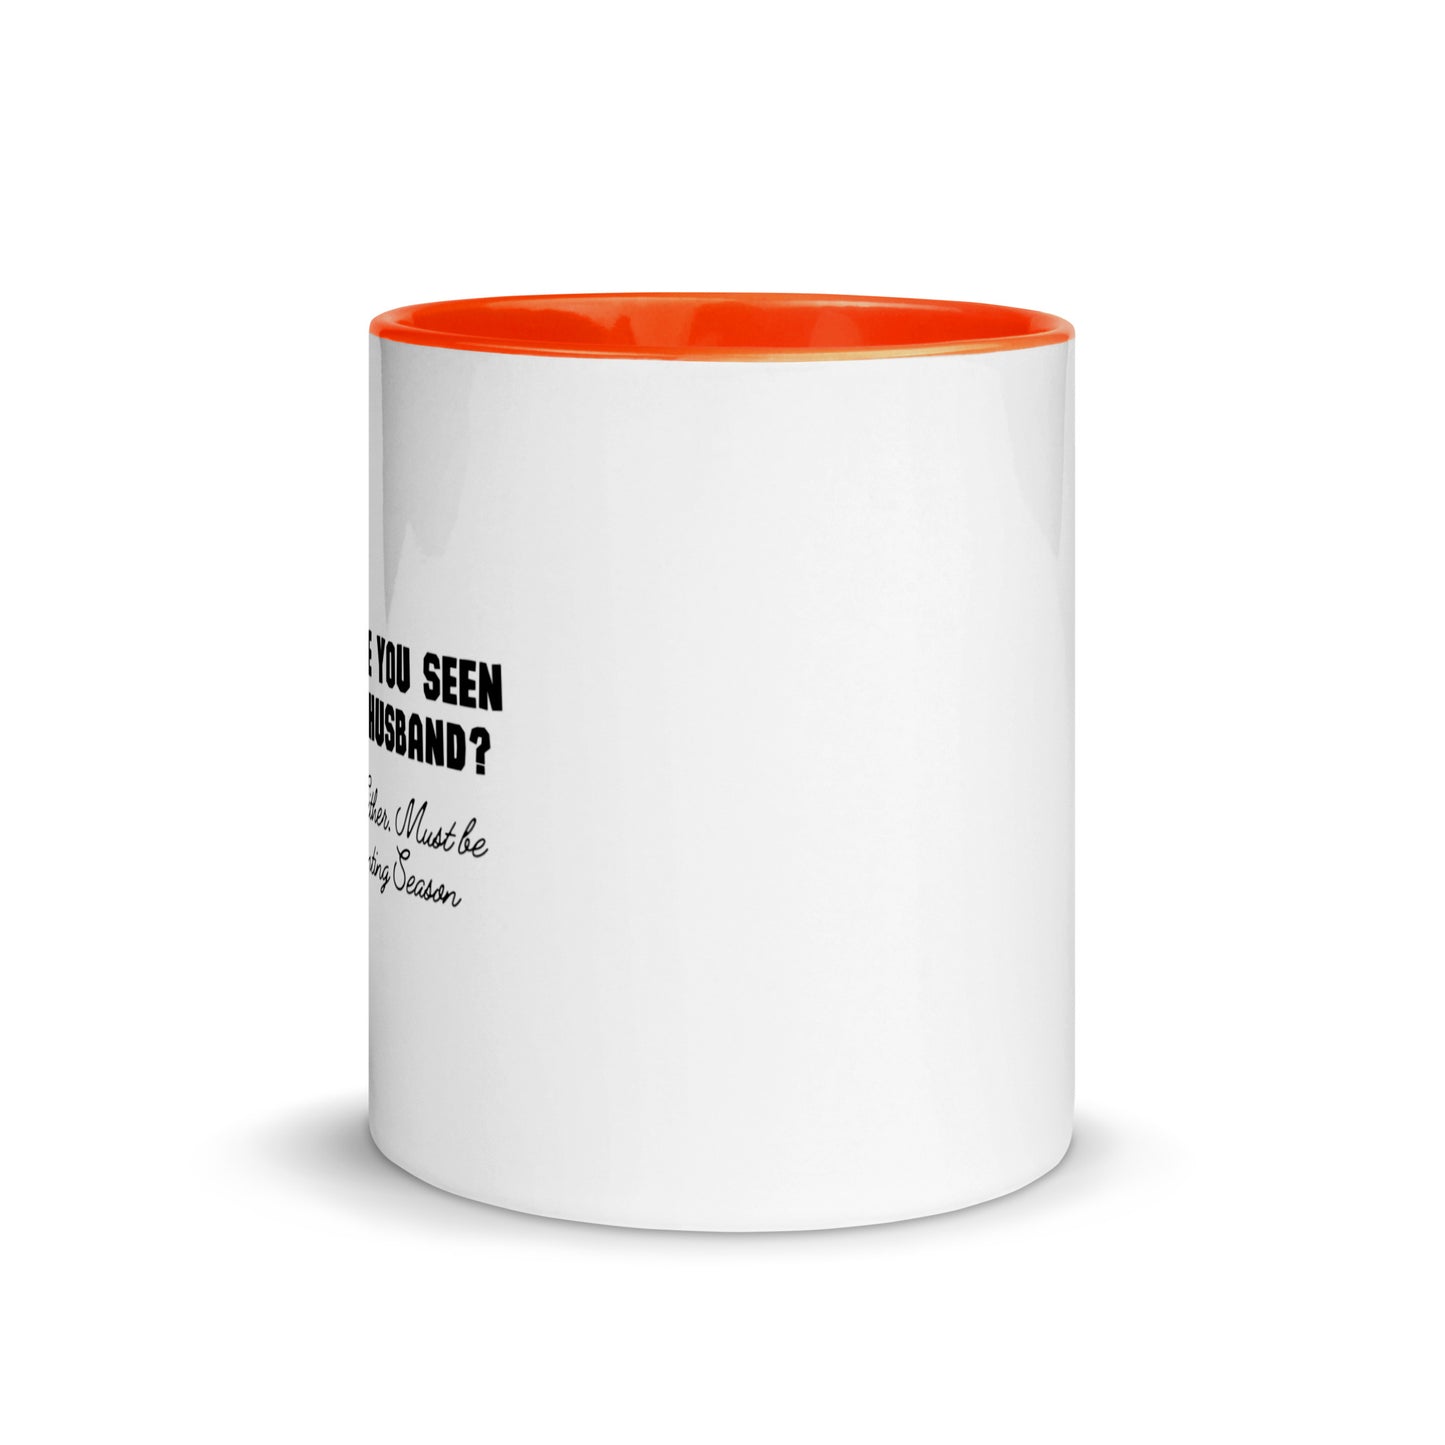 Have You Seen My Husband? Mug with Color Inside